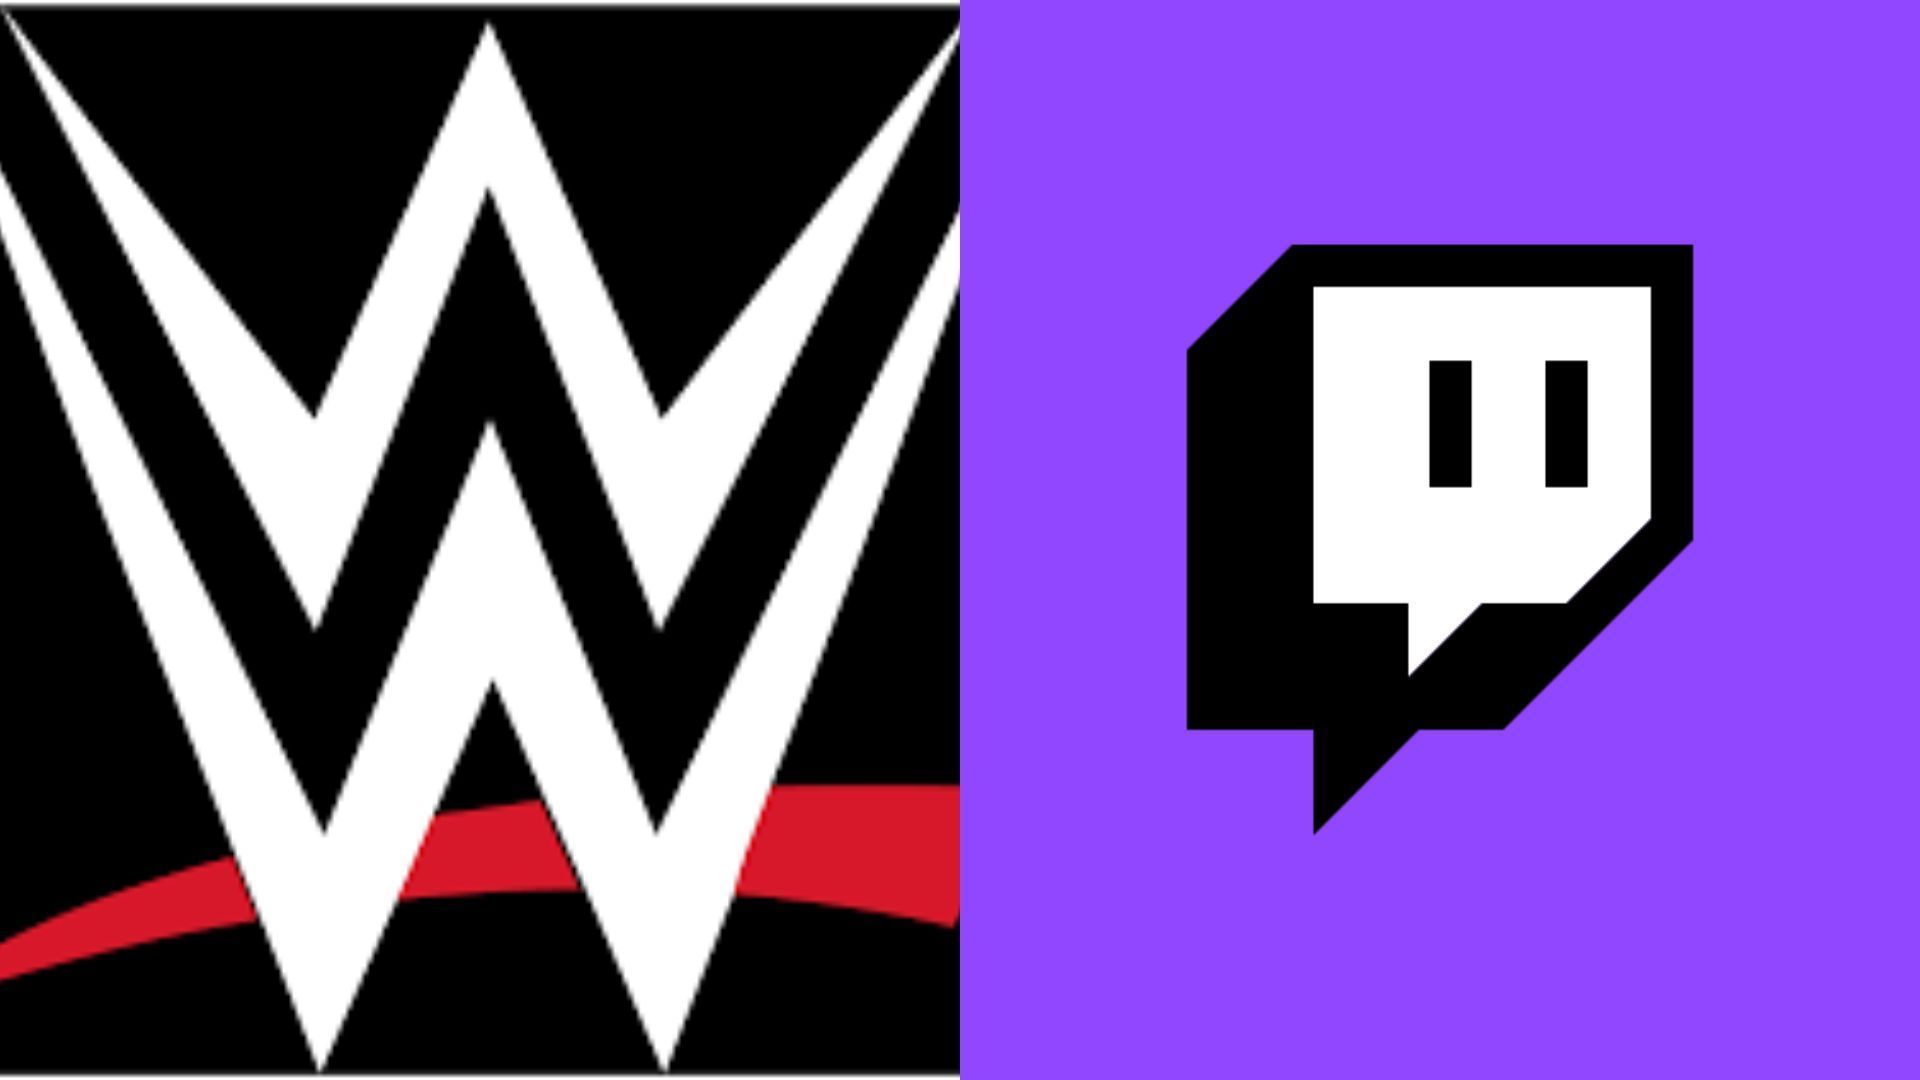 WWE and Twitch later signed an agreement to let wrestlers stream on the platform